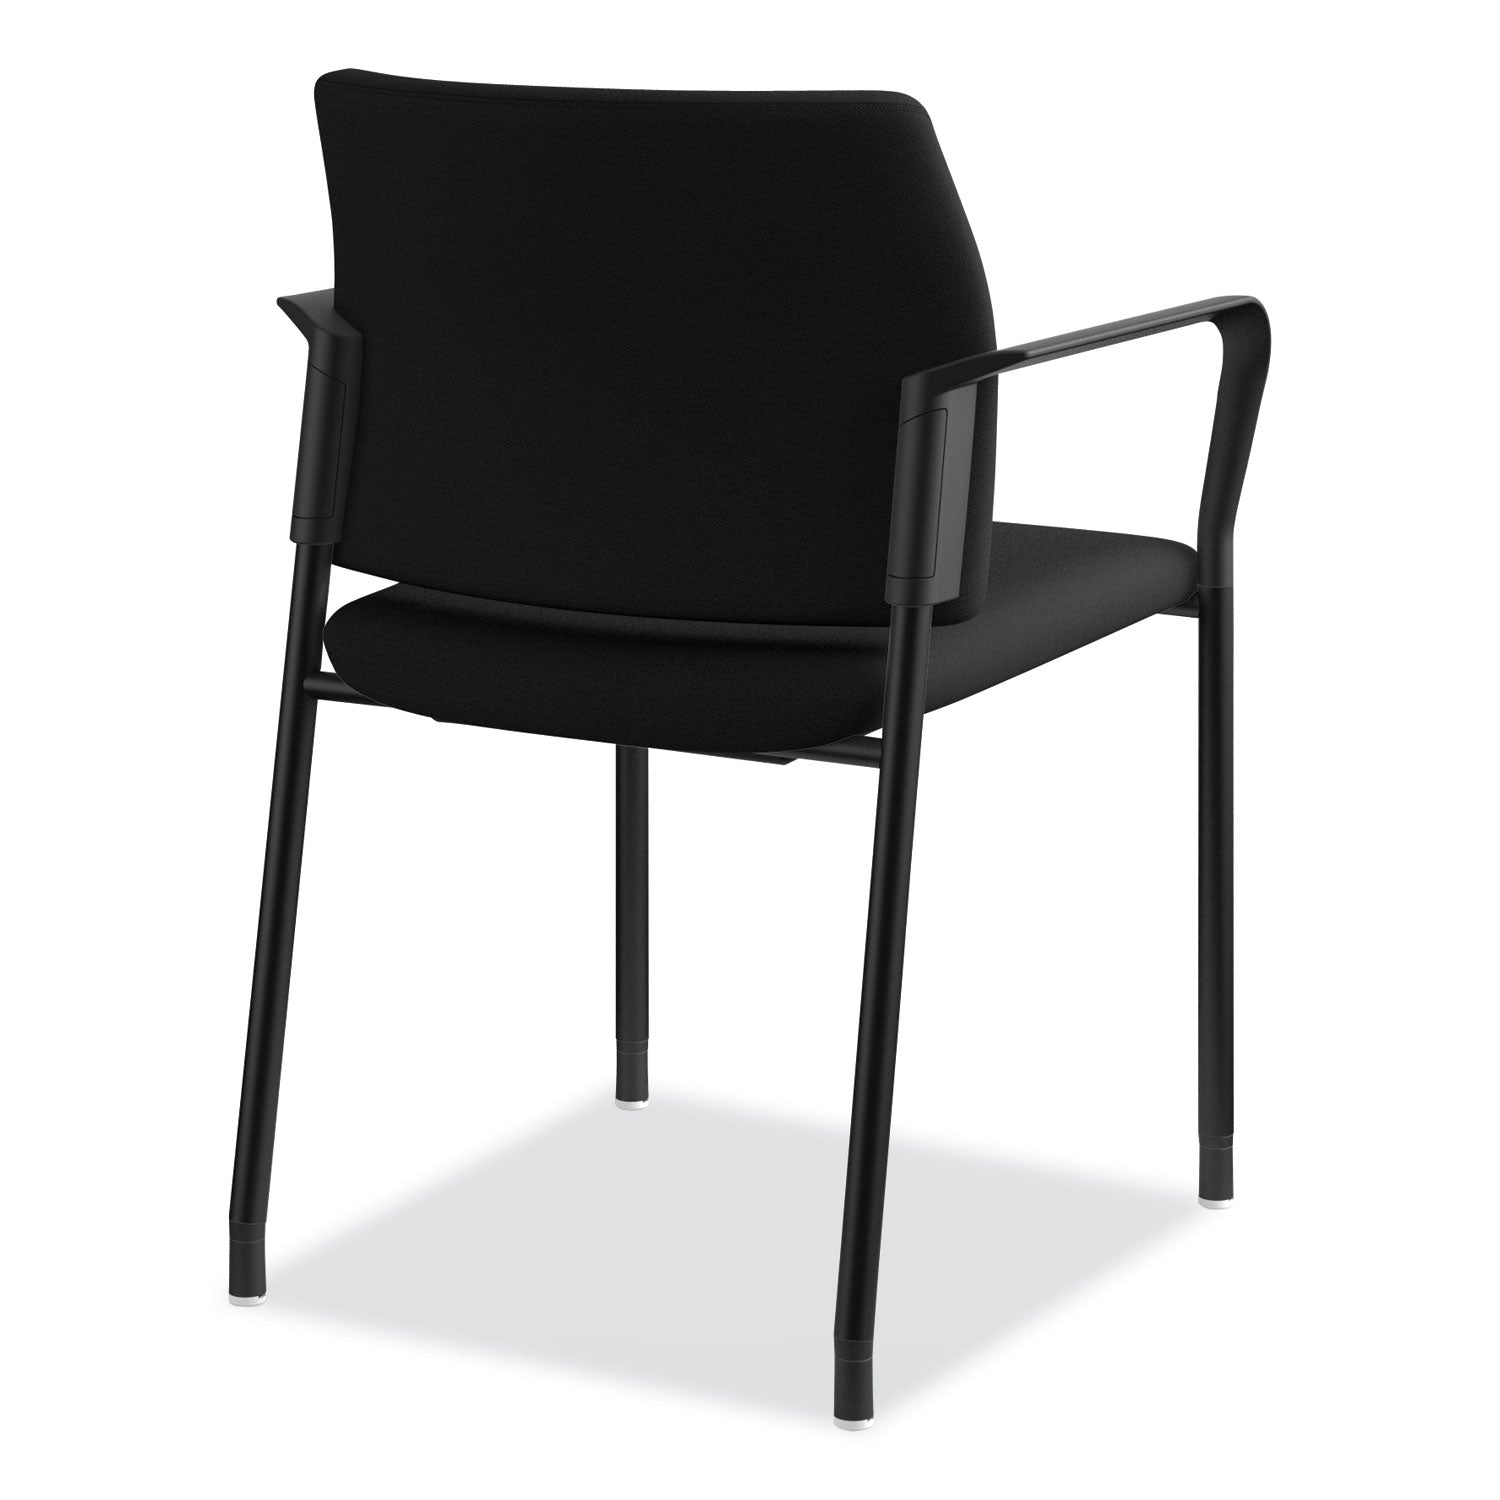 accommodate-series-guest-chair-with-arms-fabric-upholstery-2325-x-2225-x-32-black-seat-back-charblack-legs-2-carton_honsgs6fbc10c - 6